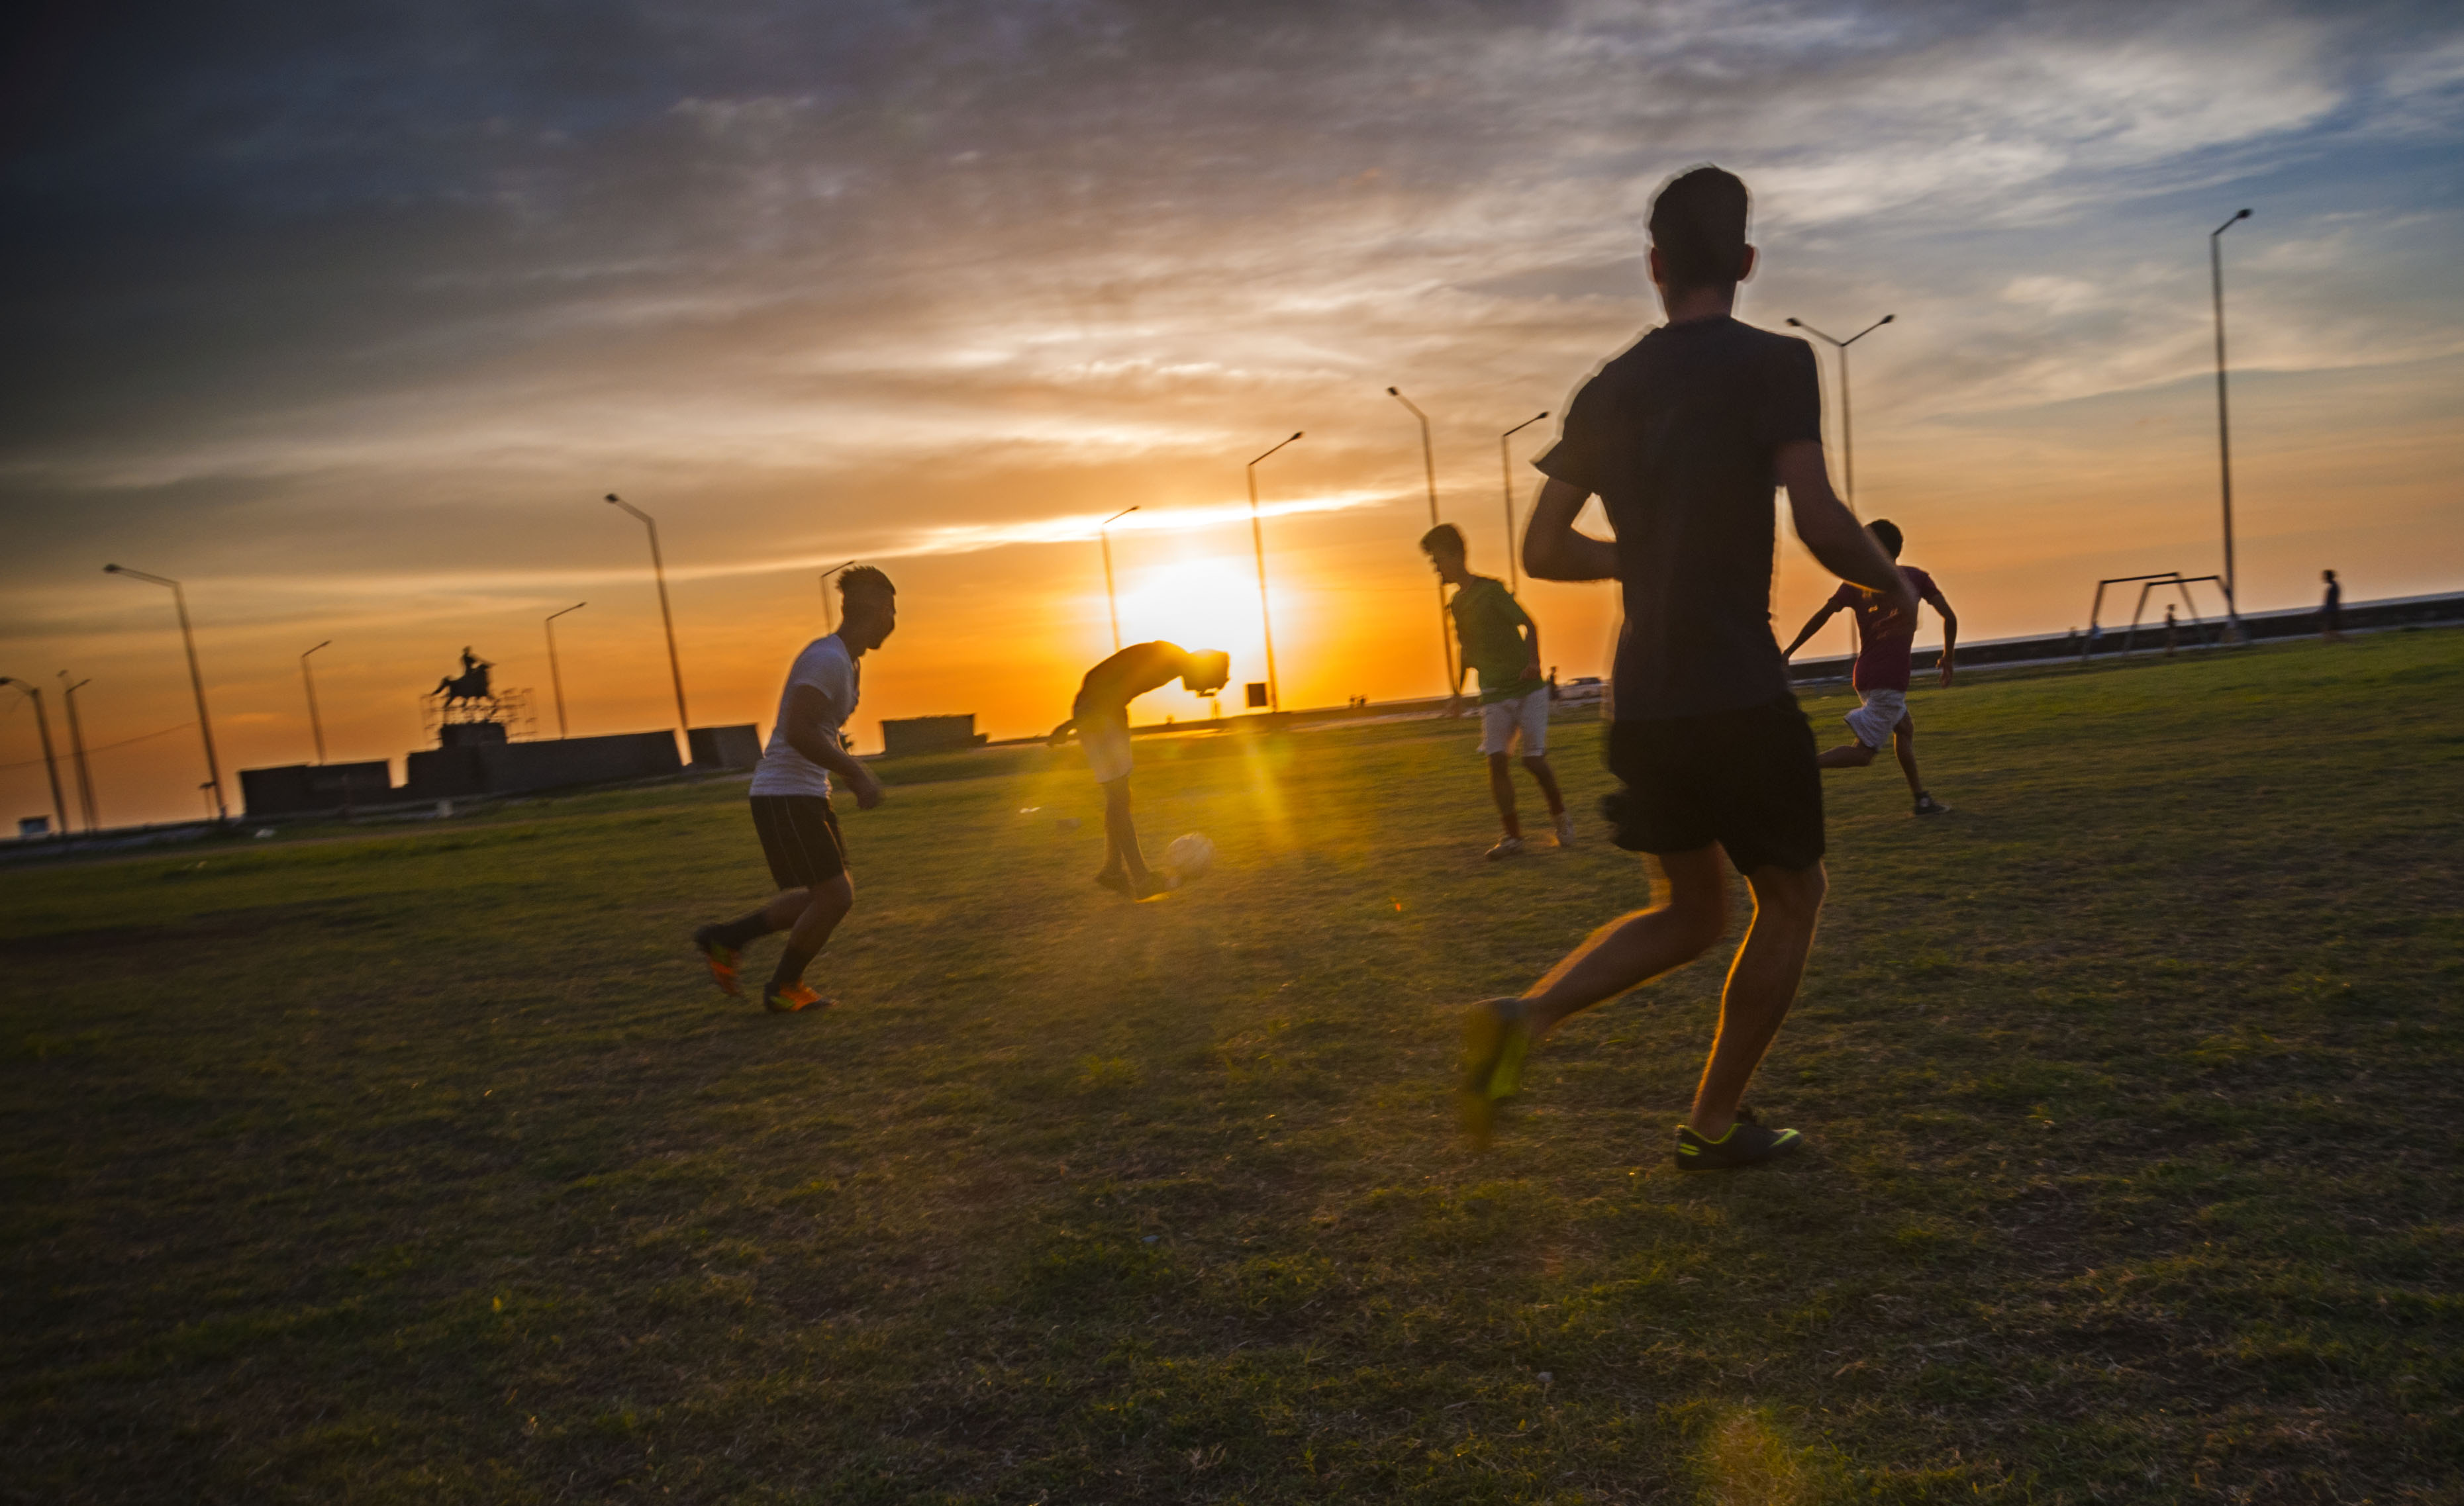 Group of young men playing soccer at sunset.